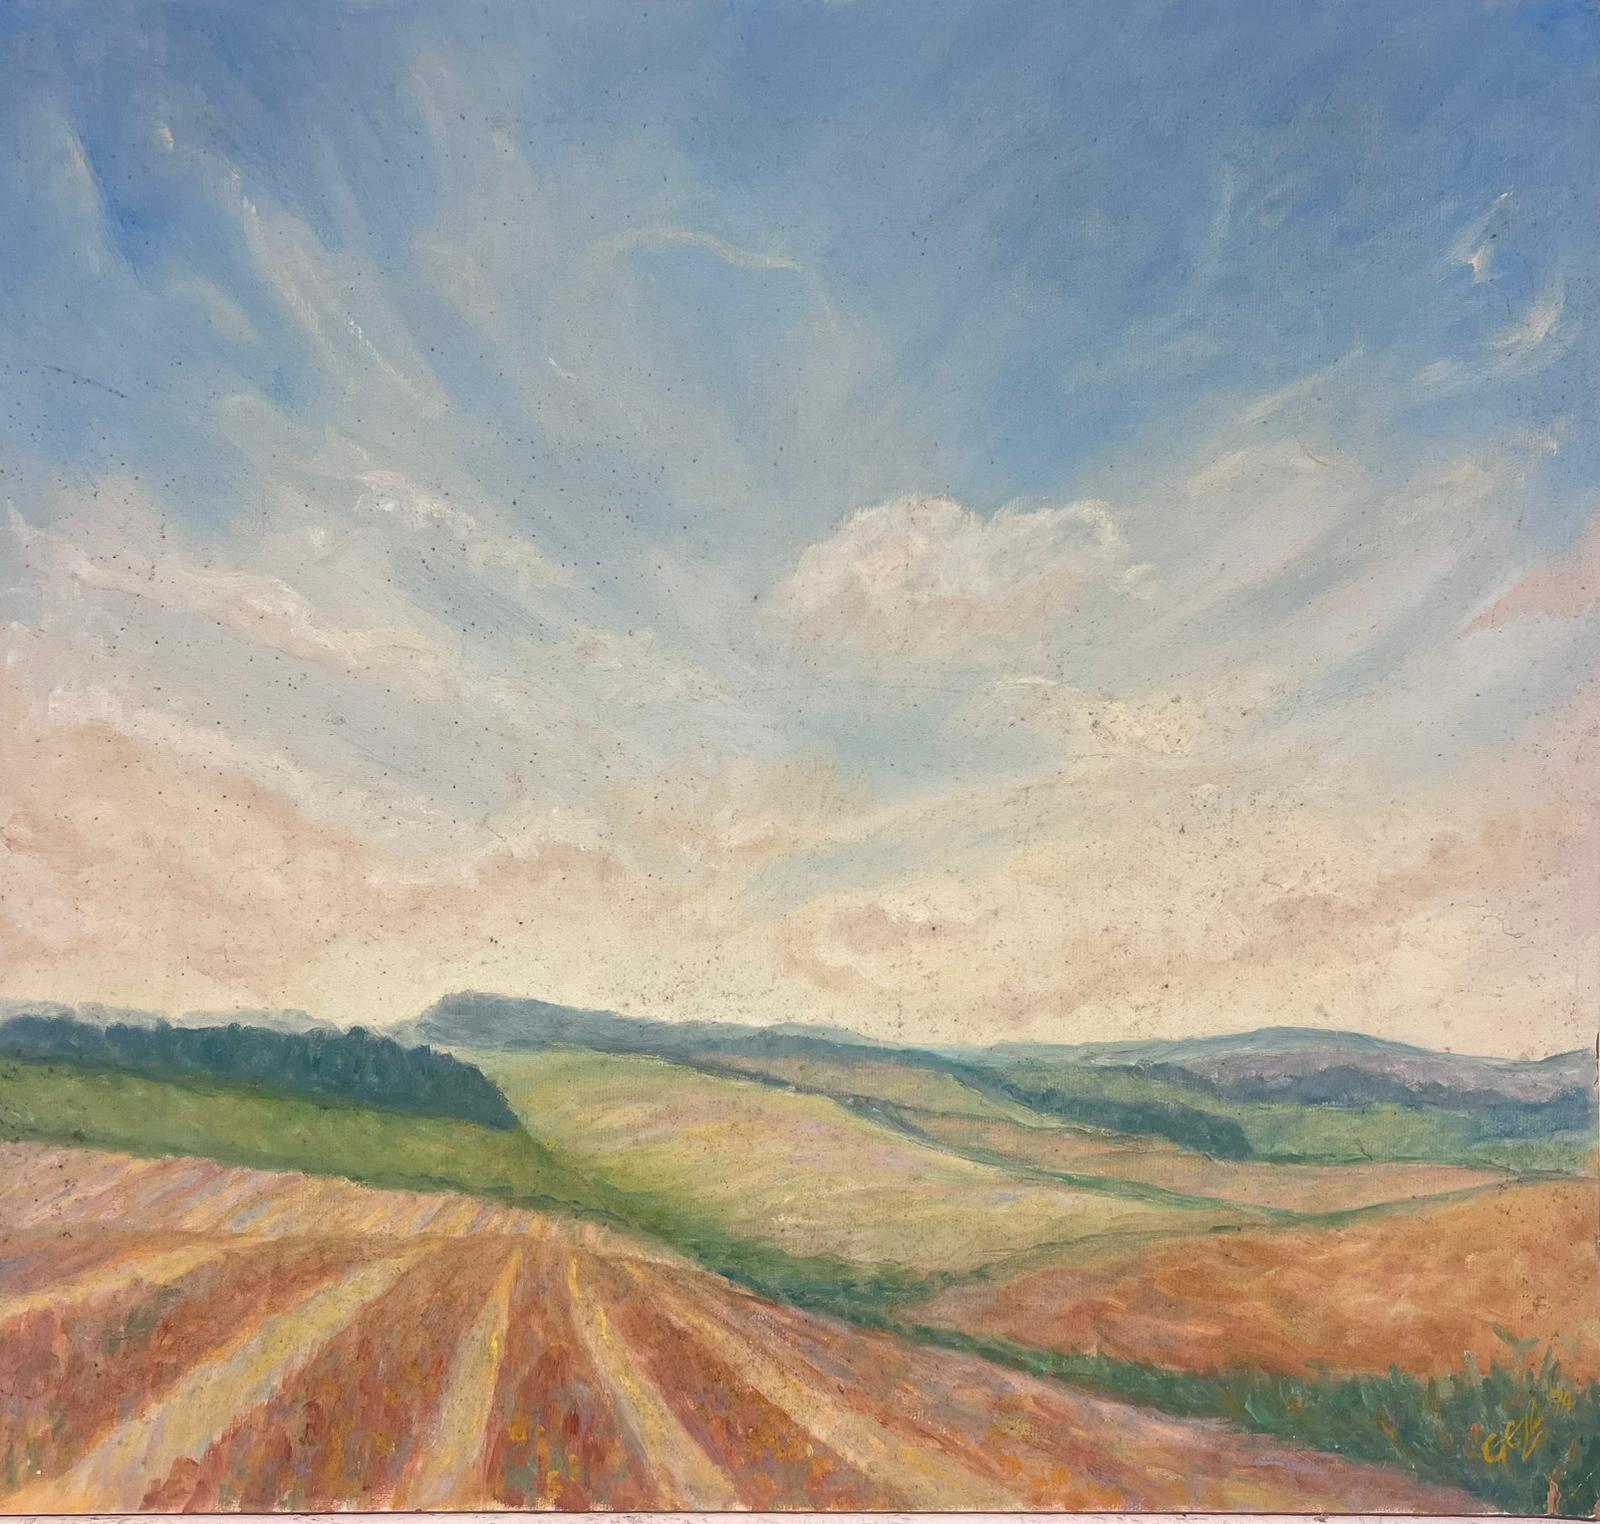 Geza Somerset-Paddon Landscape Painting - Cloudy Blue Skies Over Stripey Meadows Contemporary British Oil Painting